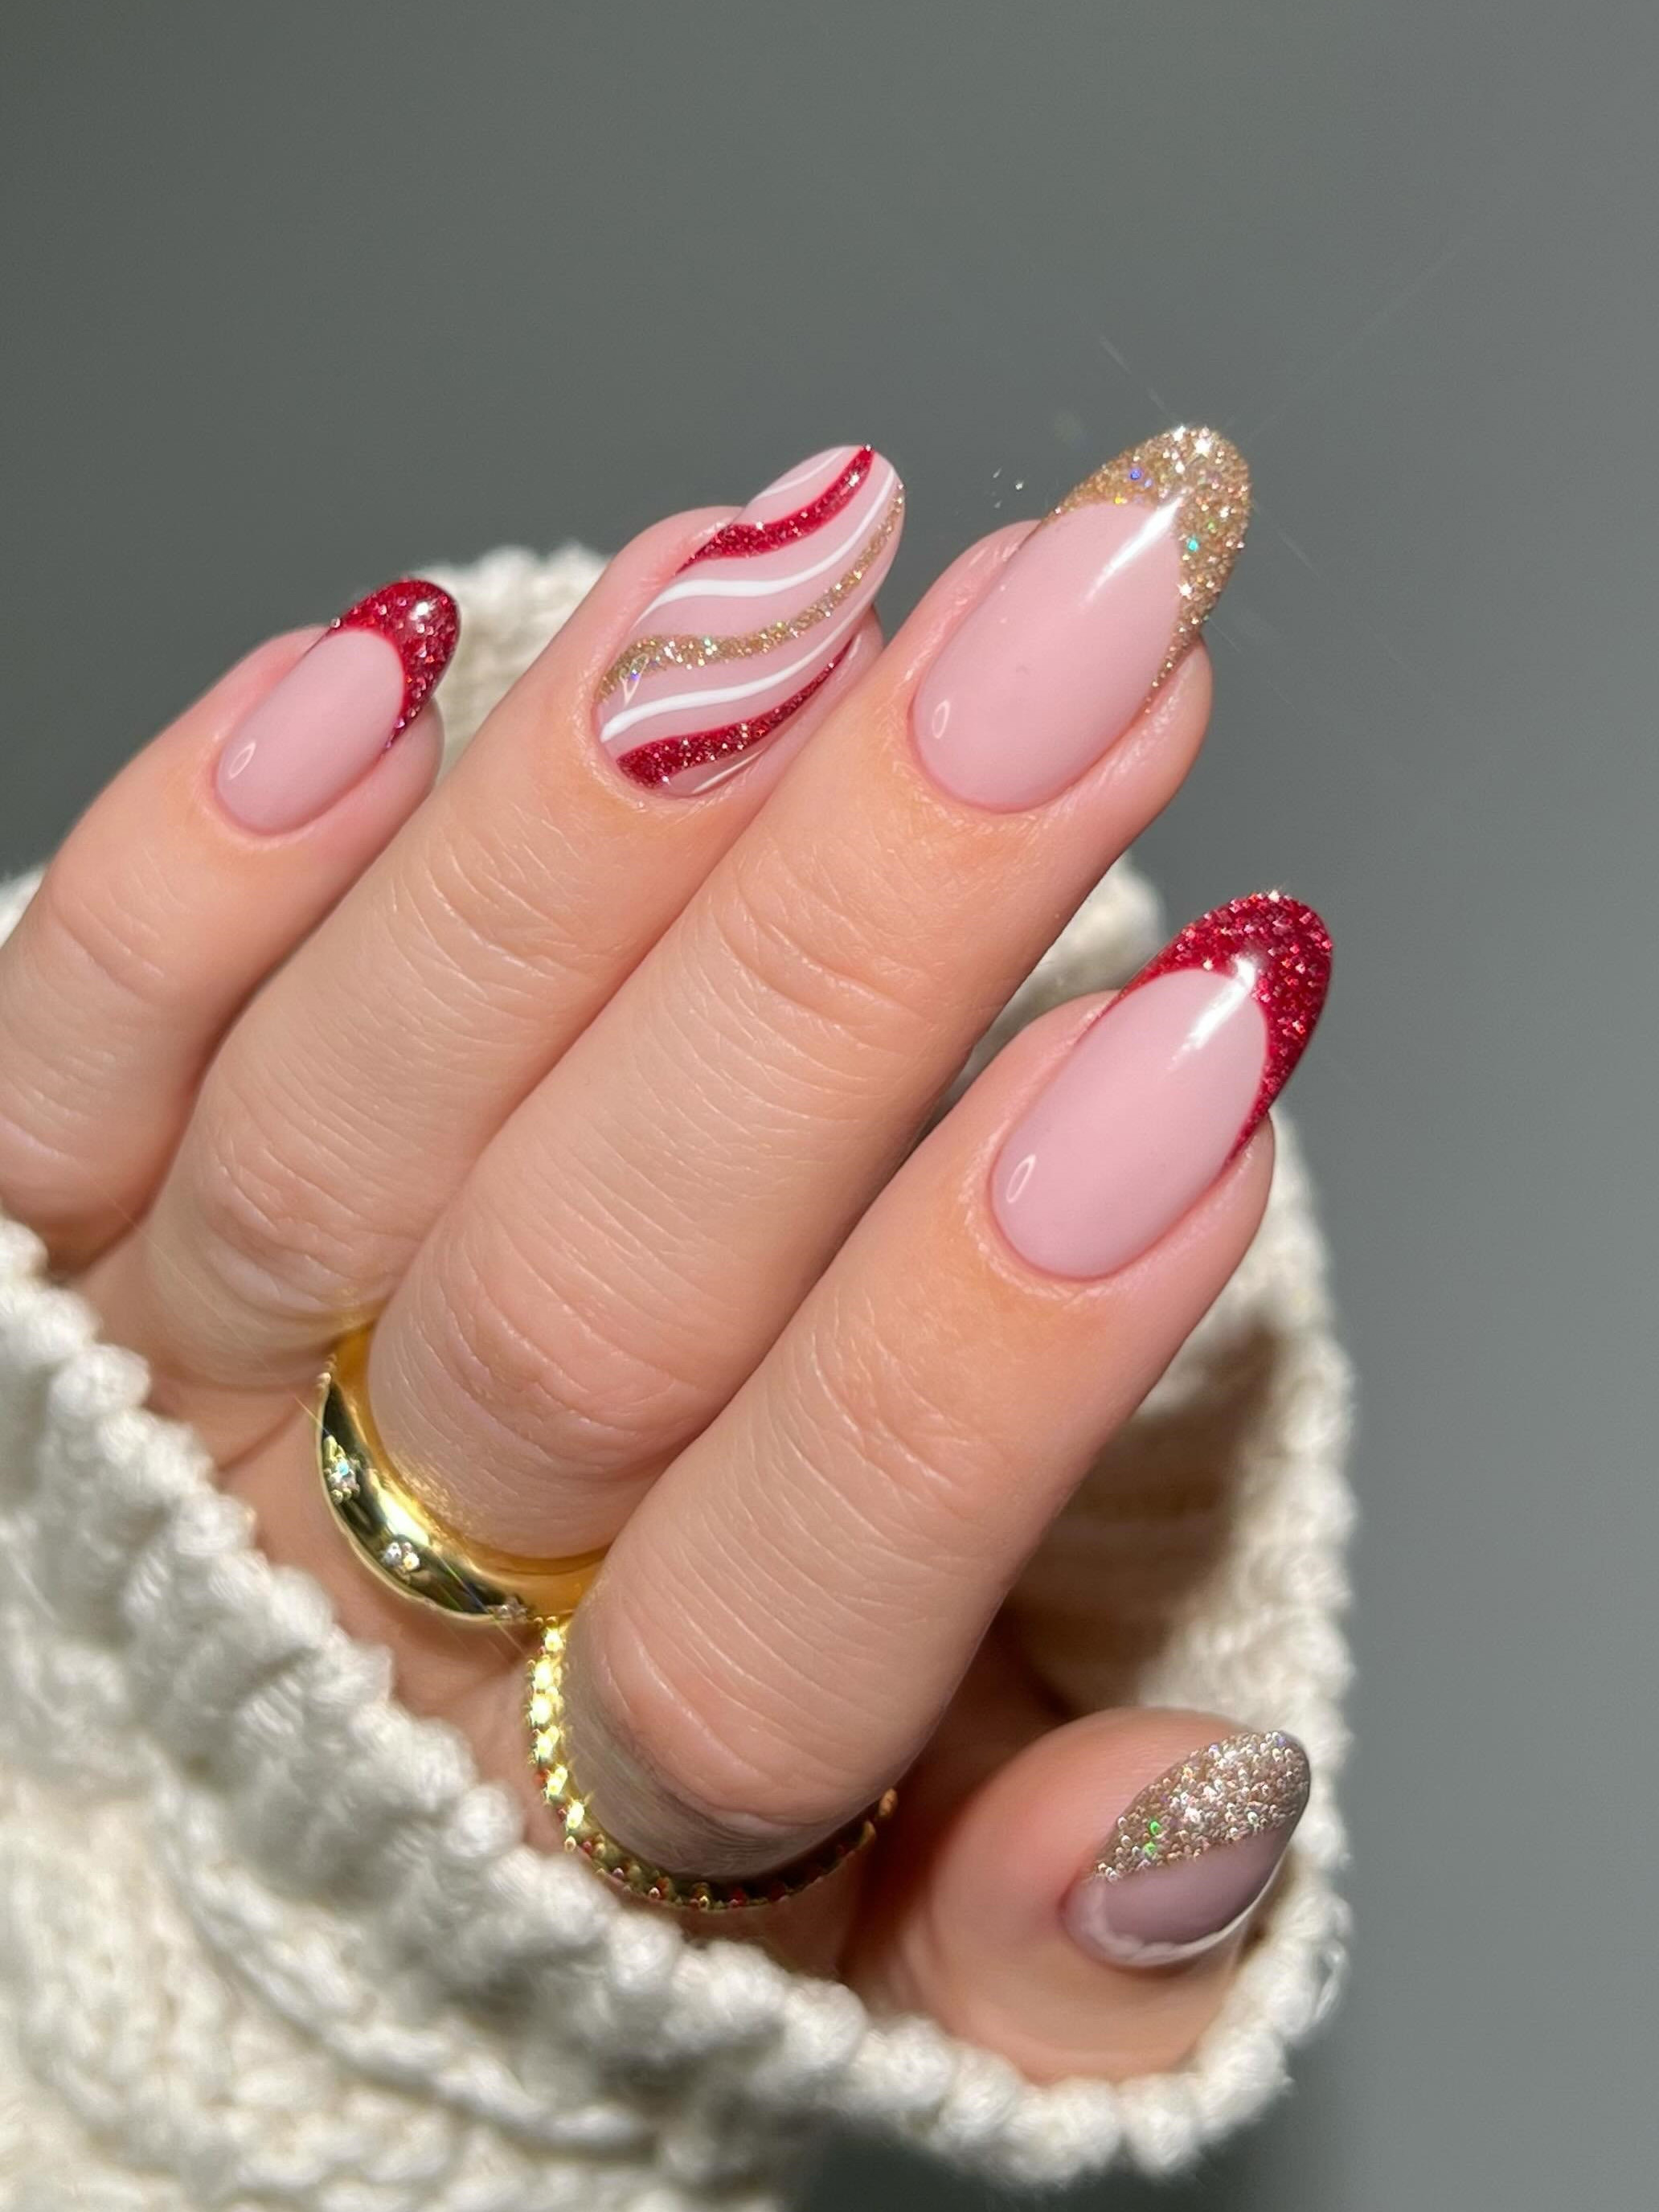 30+ Best Christmas Nails You Need To Try; This includes winter nails , holiday nails, santa nails, reindeer nails, christmas tree nails , holly nails, snowflakes nails & more! #holidaynails #christmasnails, #winternails